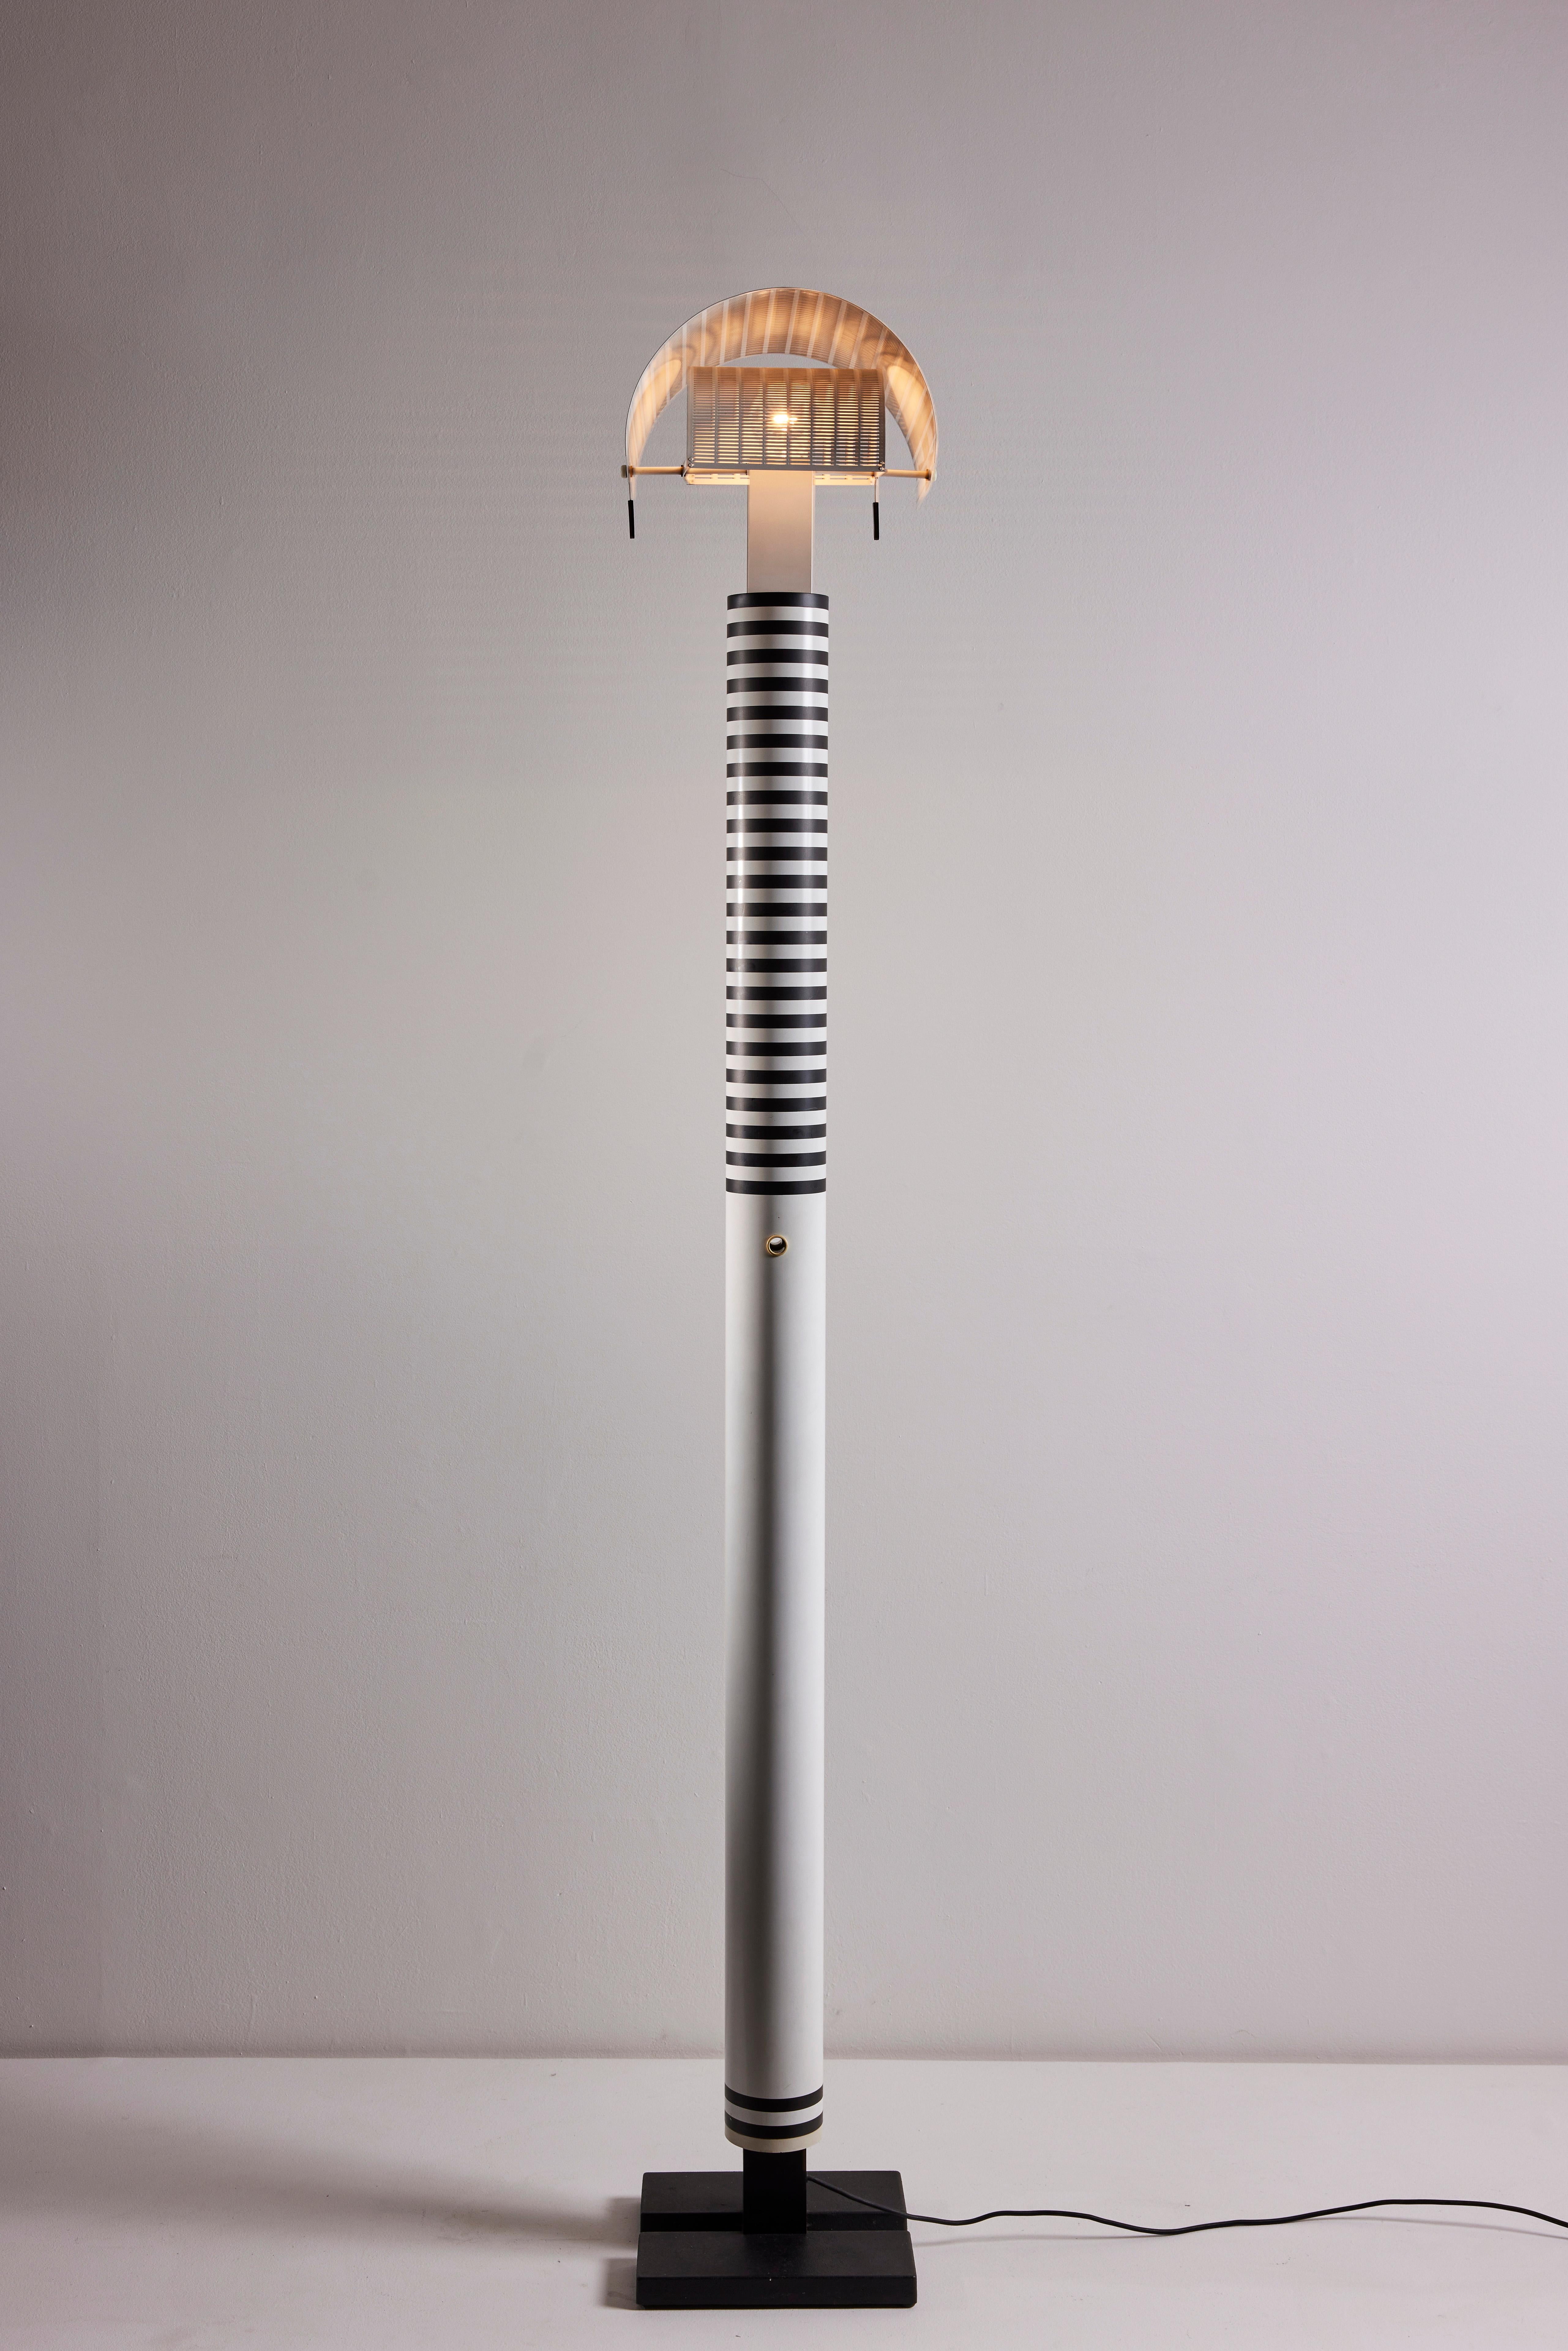 Shogun floor lamp by Mario Botta for Artemide. Designed and manufactured in Italy, circa 1980s. Enameled aluminum, enameled steel. Adjustable shade. Original European cord. We recommend on E26 60w maximum bulb. Bulb provided as a one time courtesy.